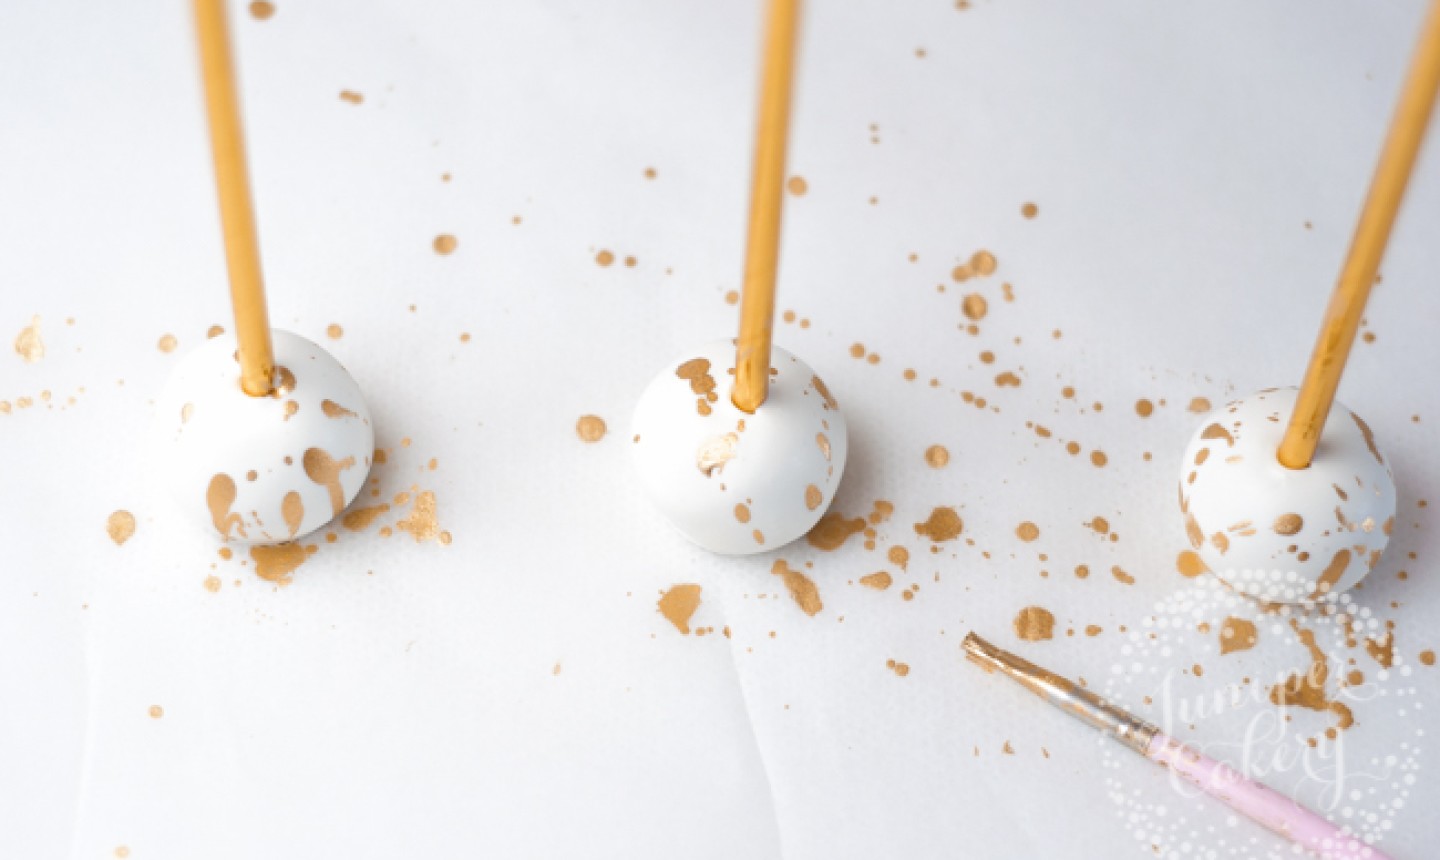 painting cake pops with gold edible paint